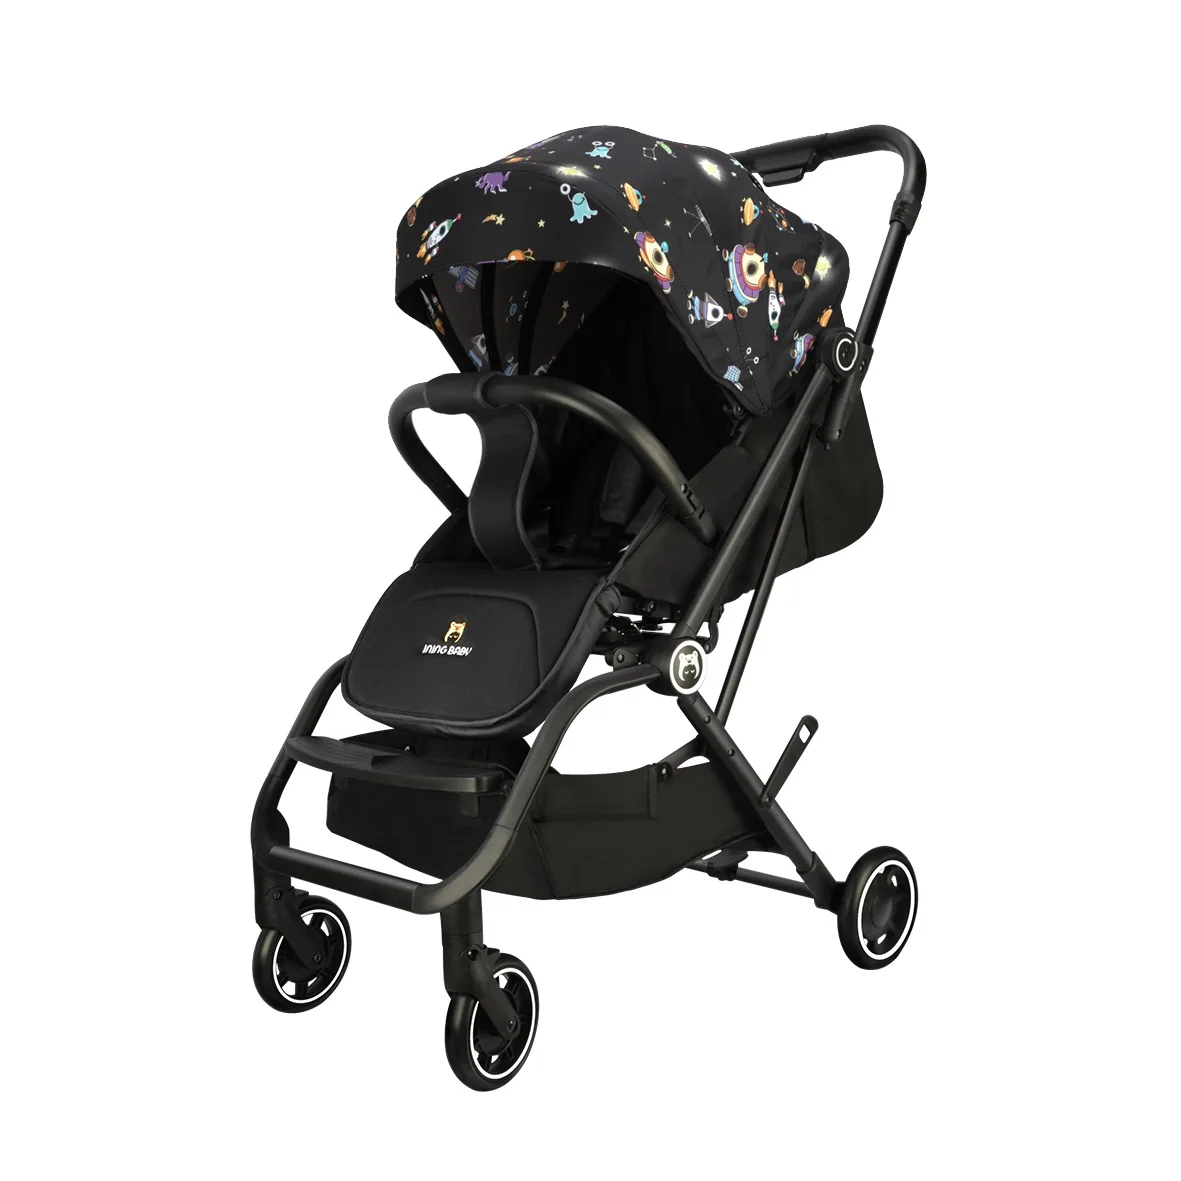 New Baby Stroller Can Sit and Lie High Landscape 360 Rotation Reversing Reclining Carriage Foldable Bassinet Puchair Newborn enlarge